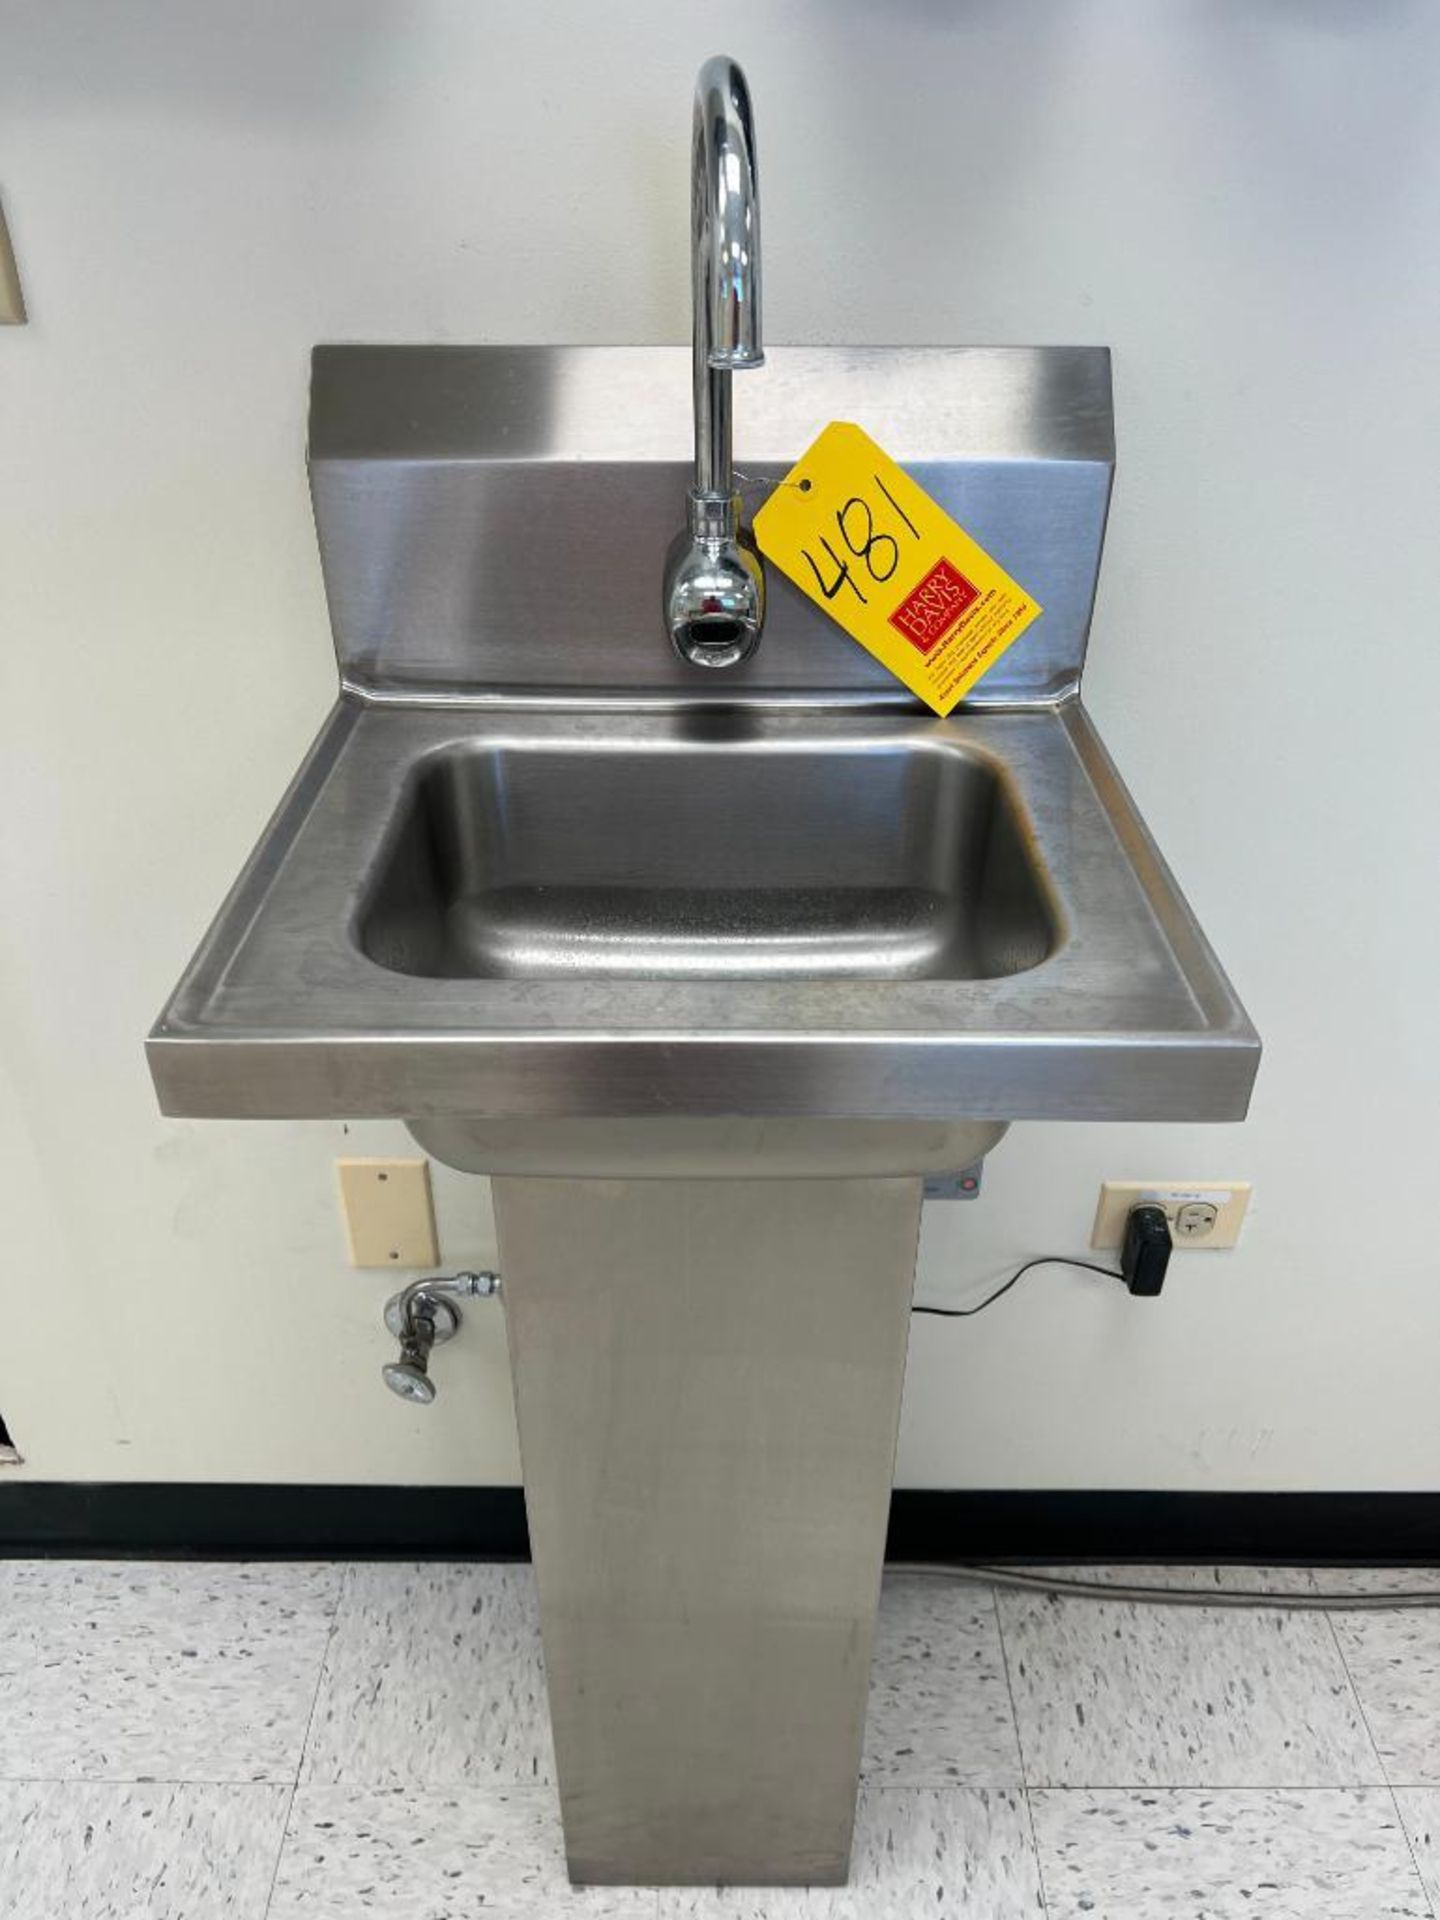 S/S Automated Hand Sink - Rigging Fee: $200